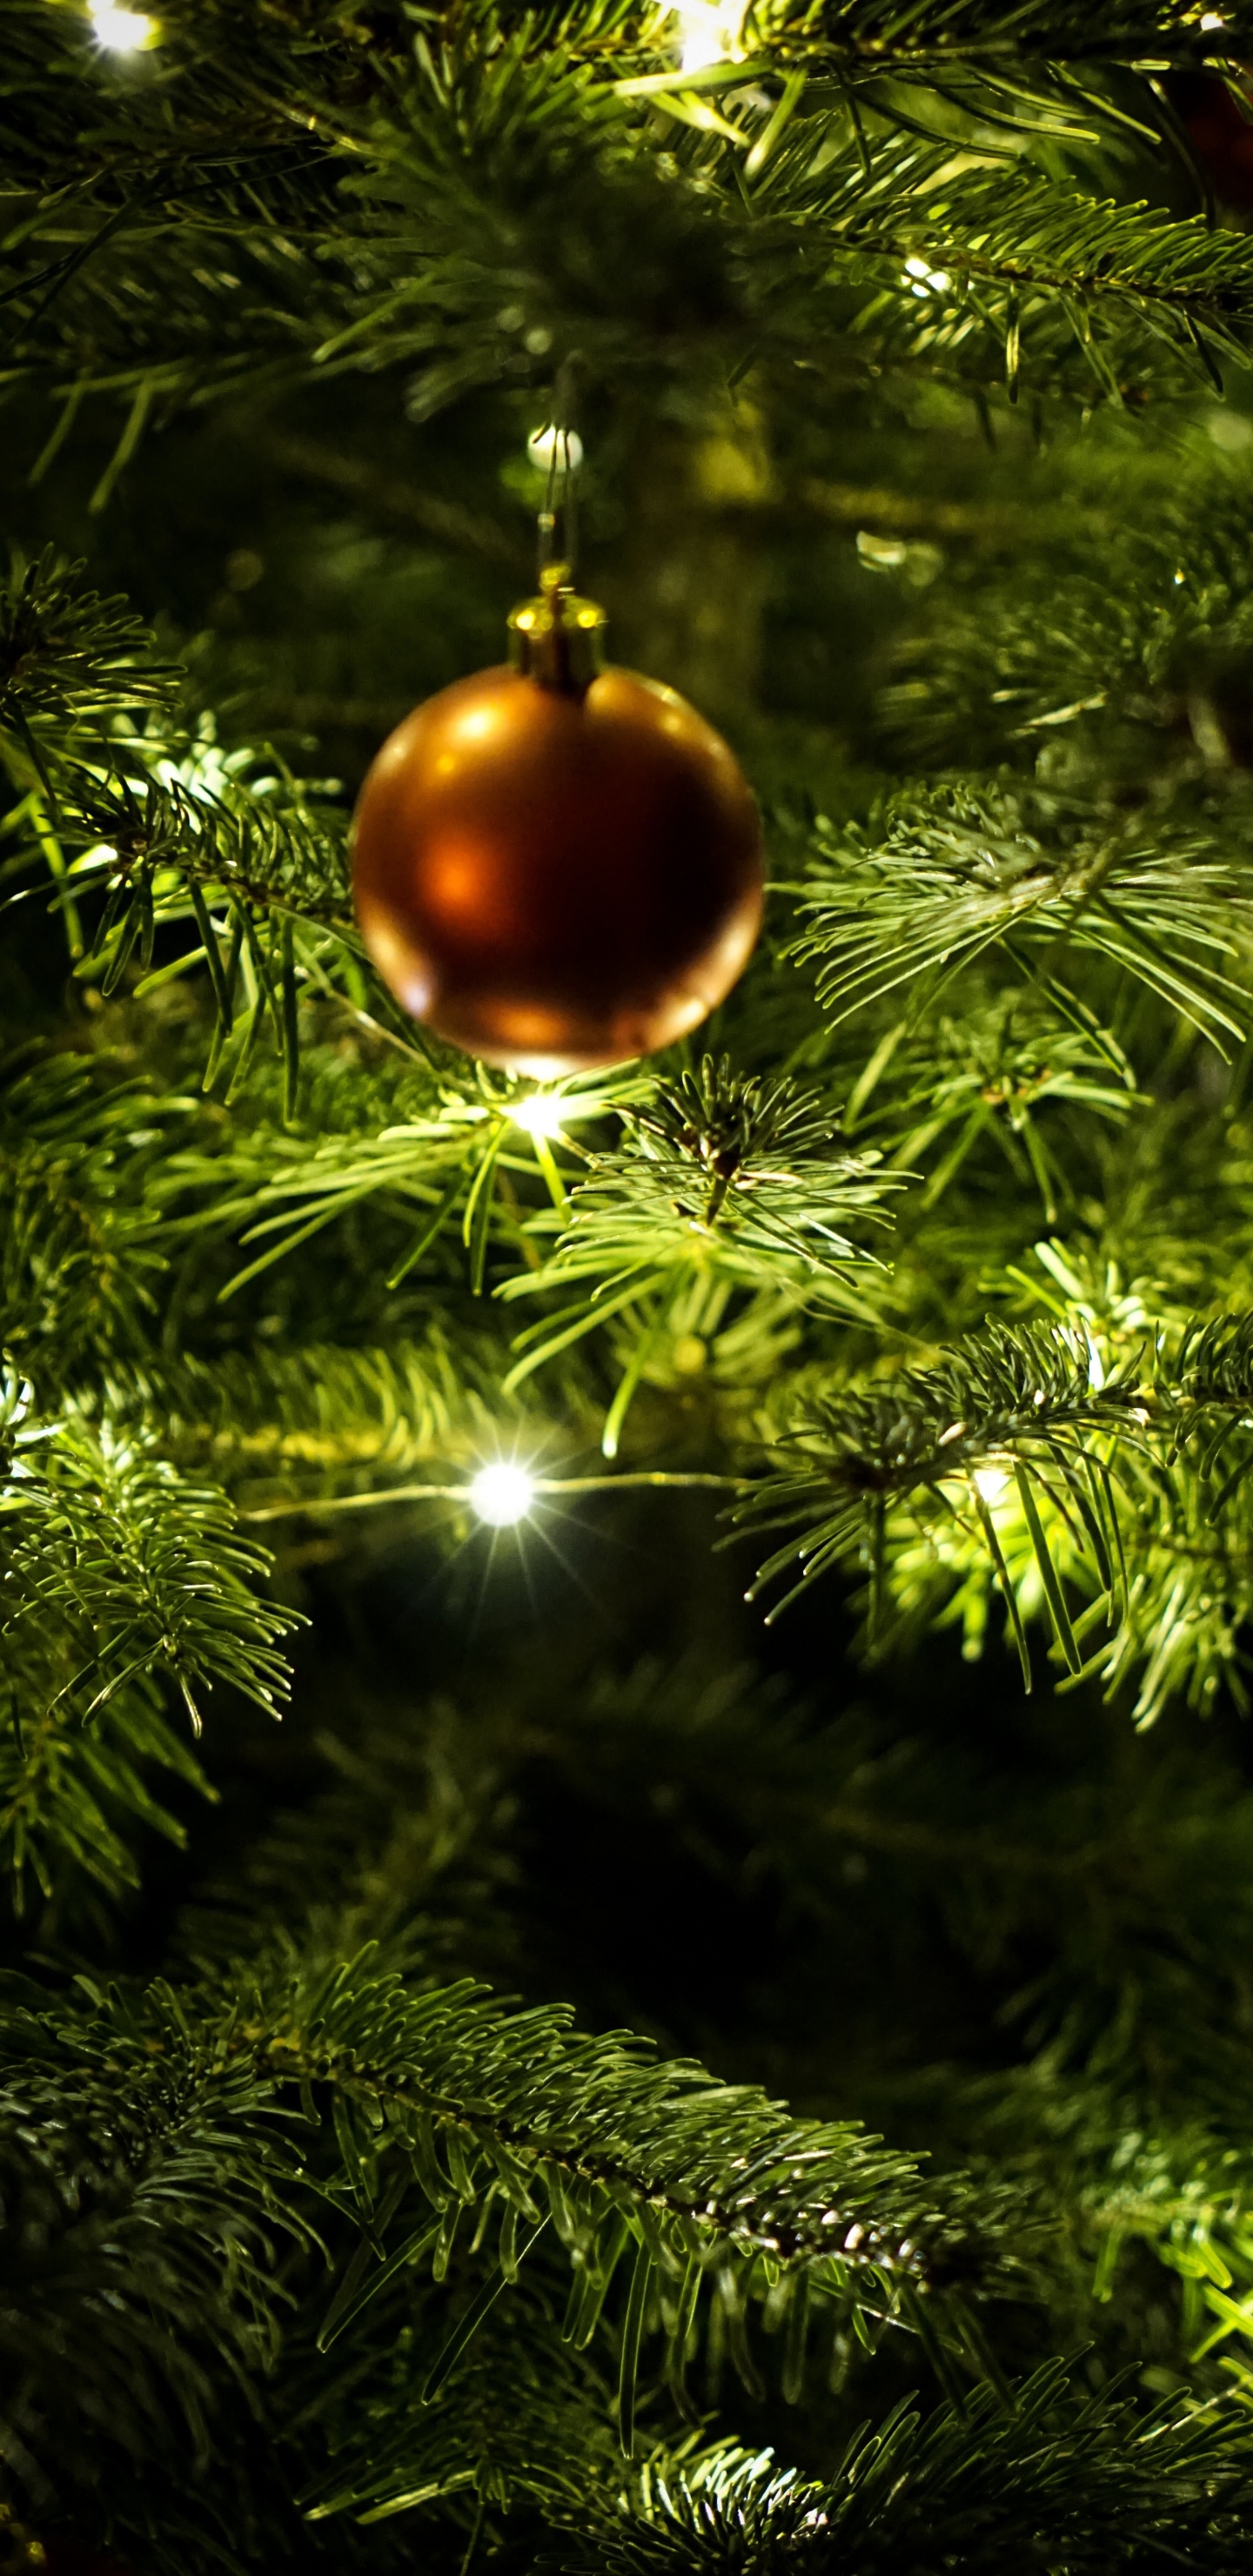 New Year, Christmas Day, Christmas Ornament, Christmas Decoration, Christmas Tree. Wallpaper in 1440x2960 Resolution